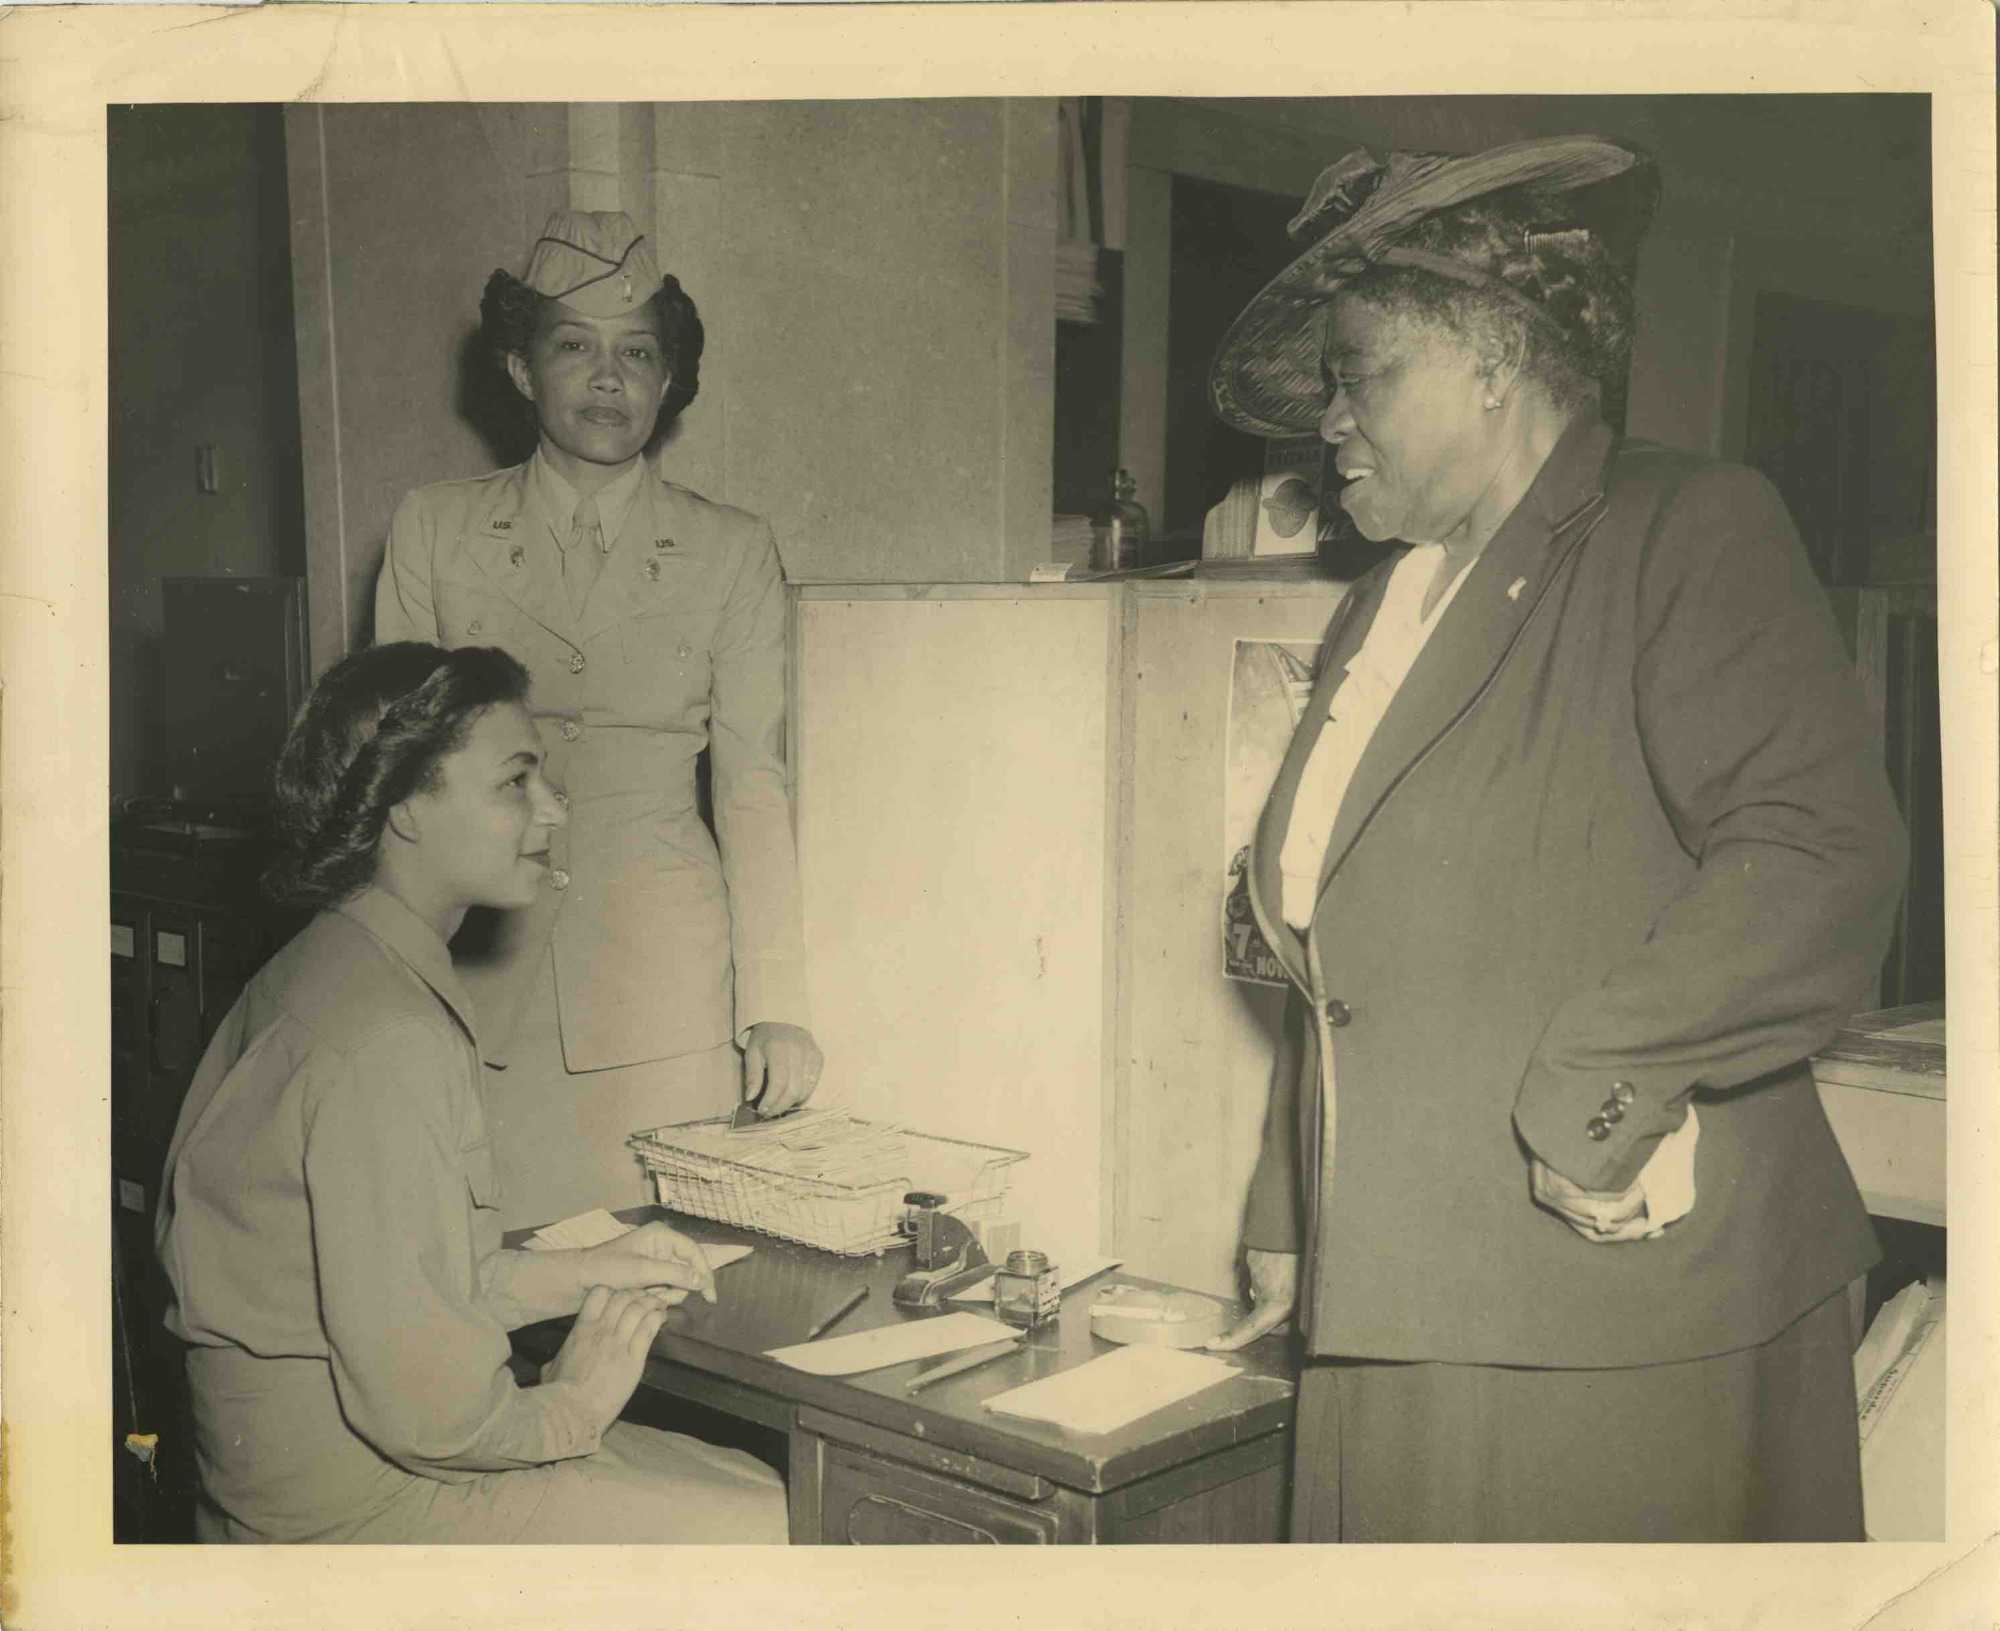 Photograph of Mary McLeod Bethune meets with members of the Women’s Army Corps